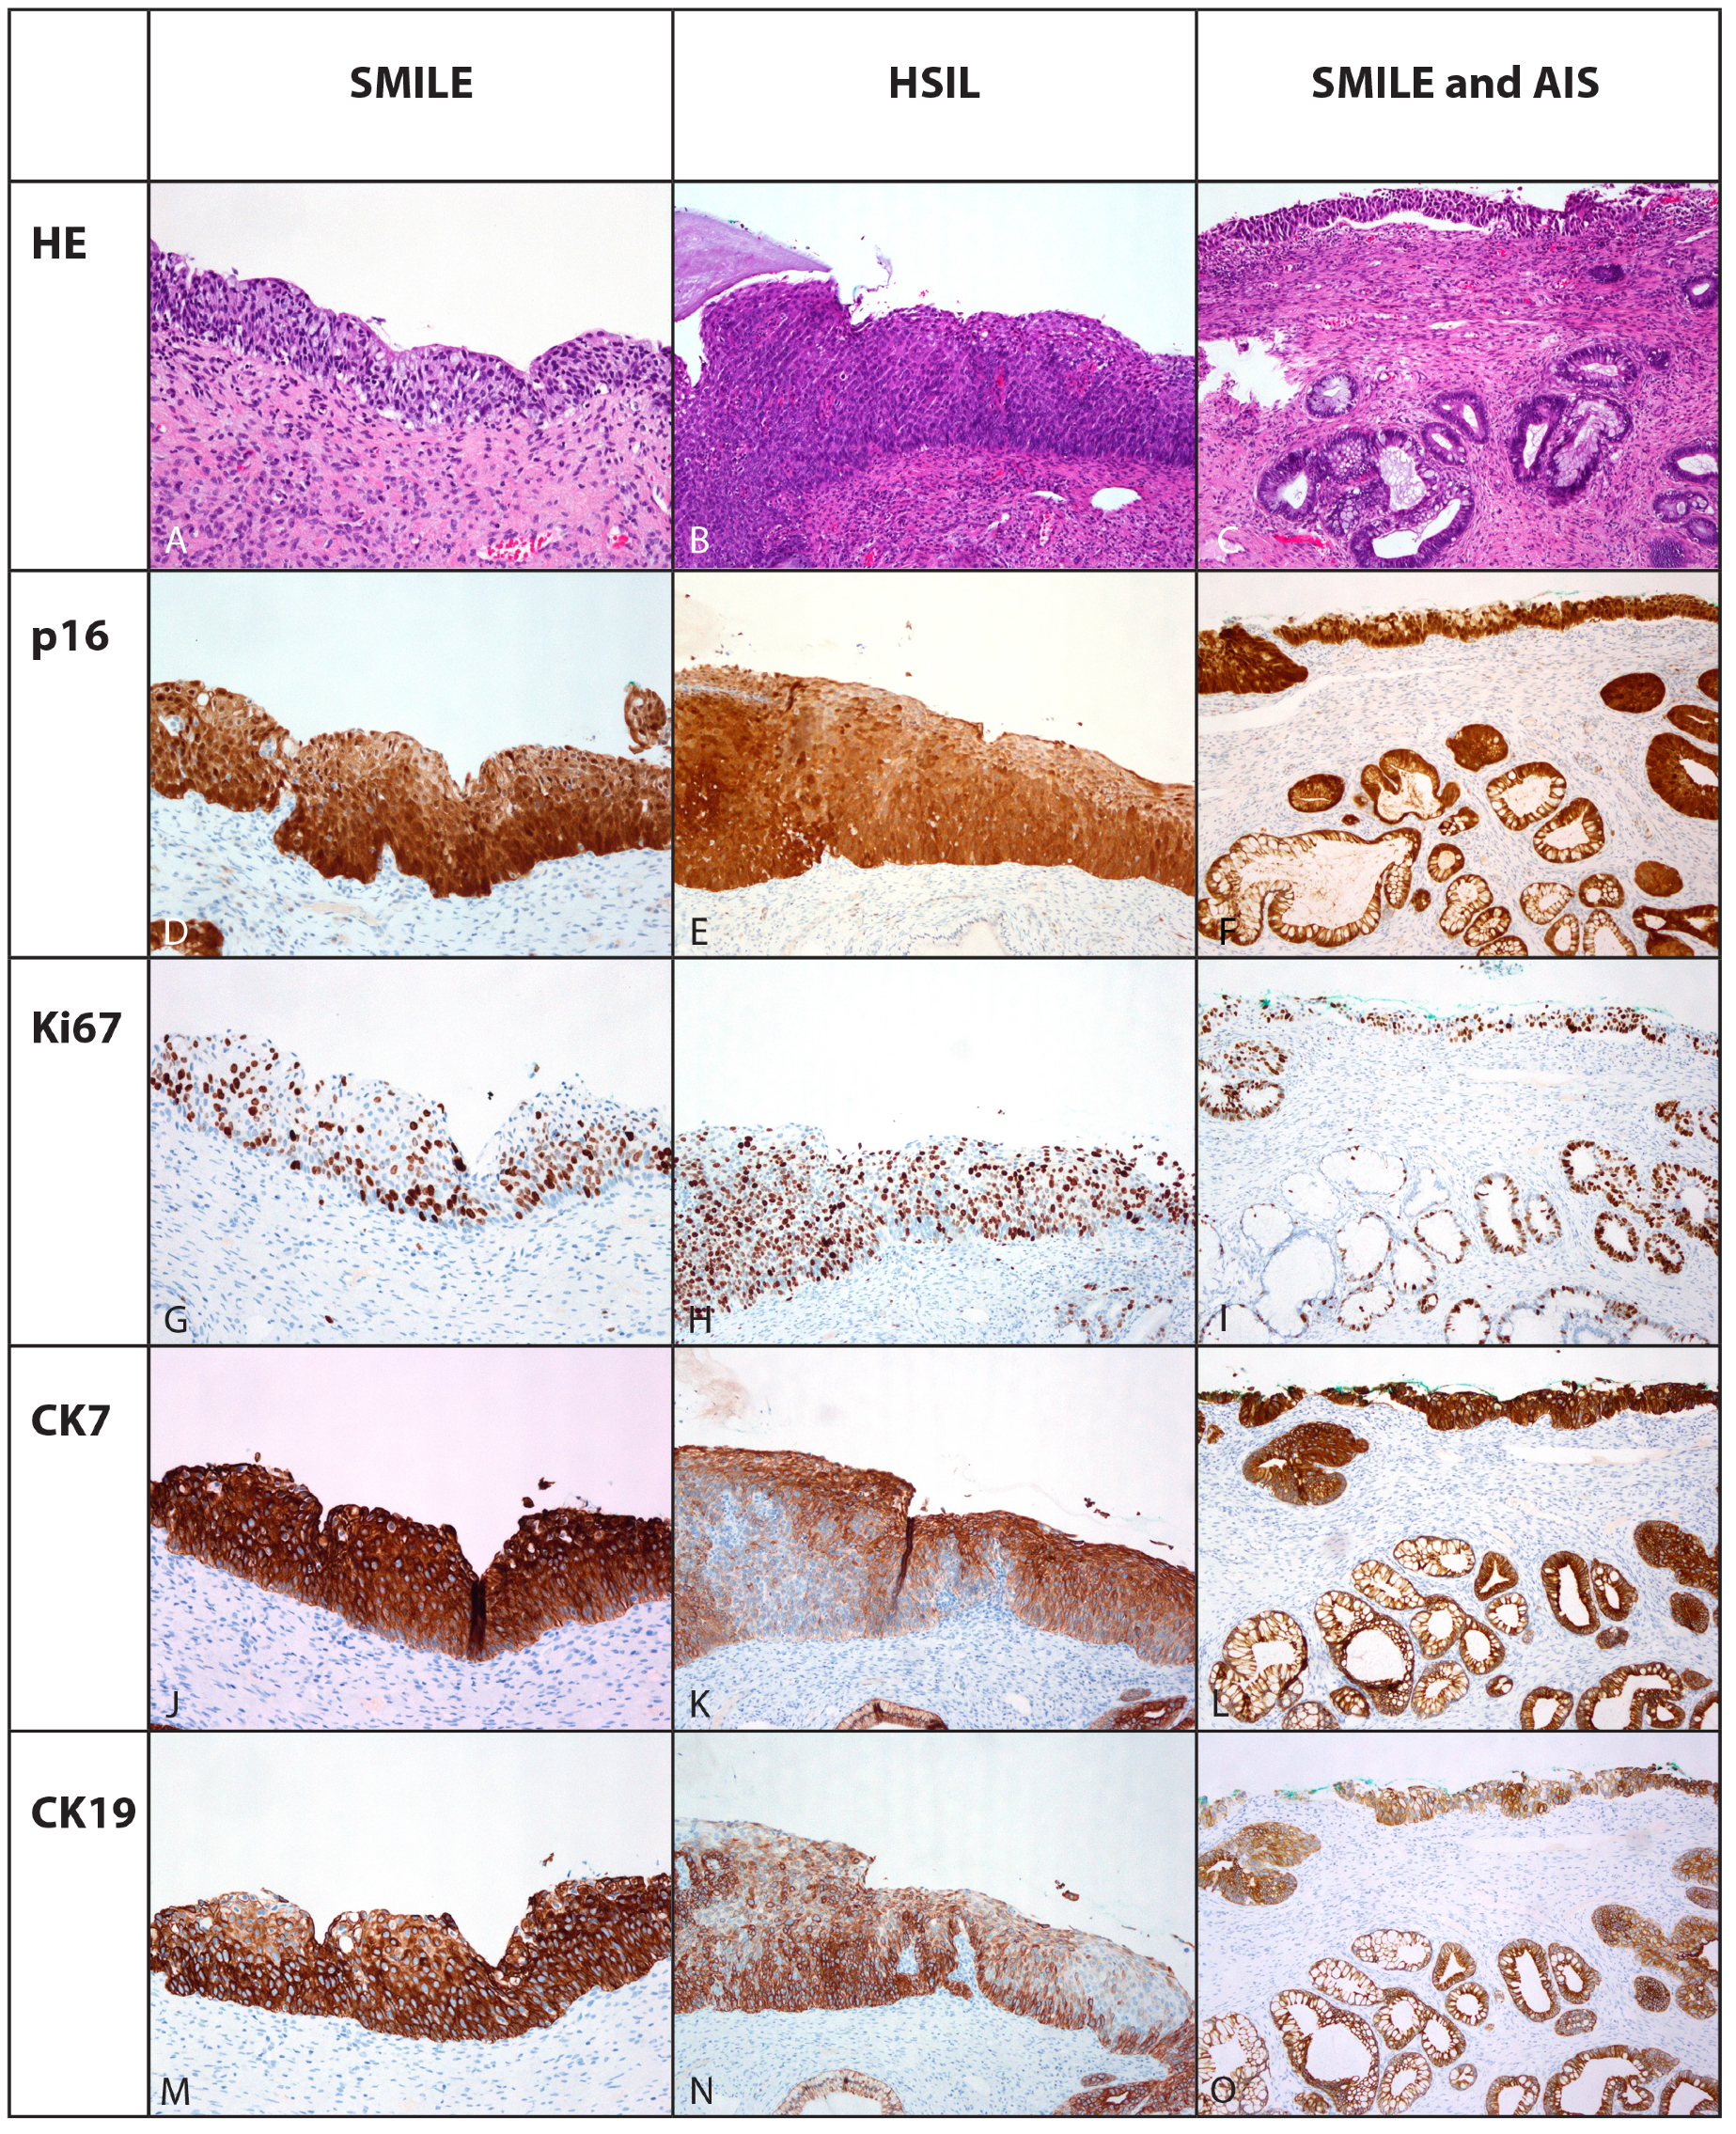 Cells | Free Full-Text | Stratified Mucin-Producing Intraepithelial Lesion  (SMILE) of the Uterine Cervix: High-Risk HPV Genotype Predominance and p40  Immunophenotype